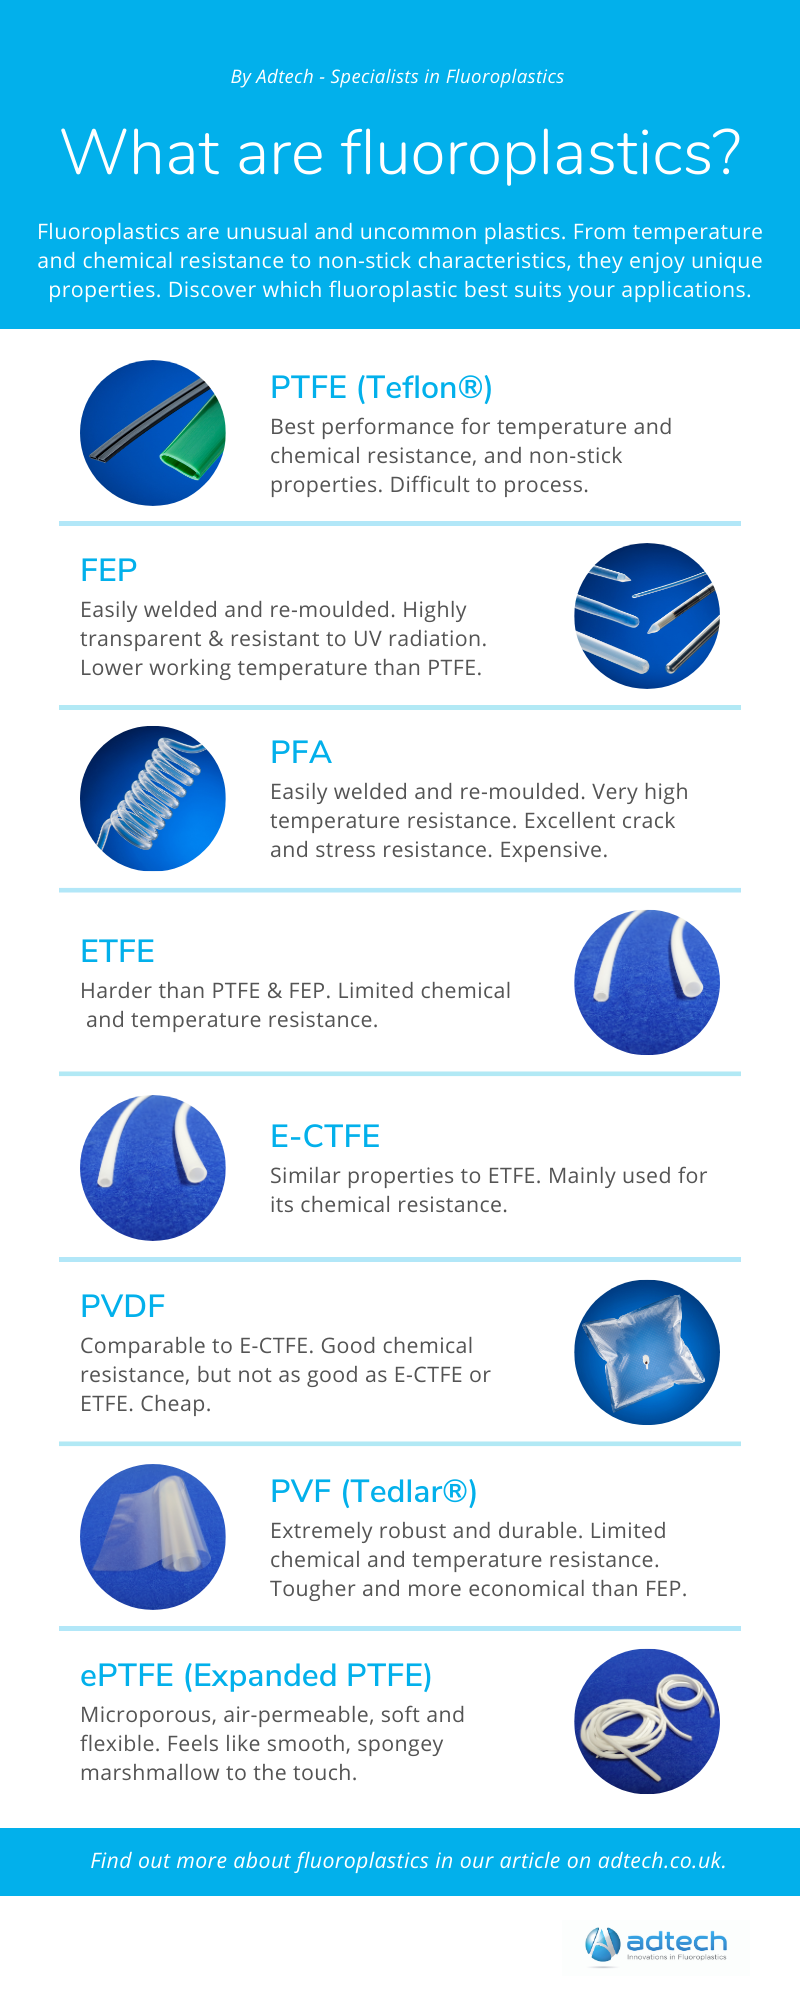 Expanded PTFE (ePTFE) vs PTFE: What's the difference?